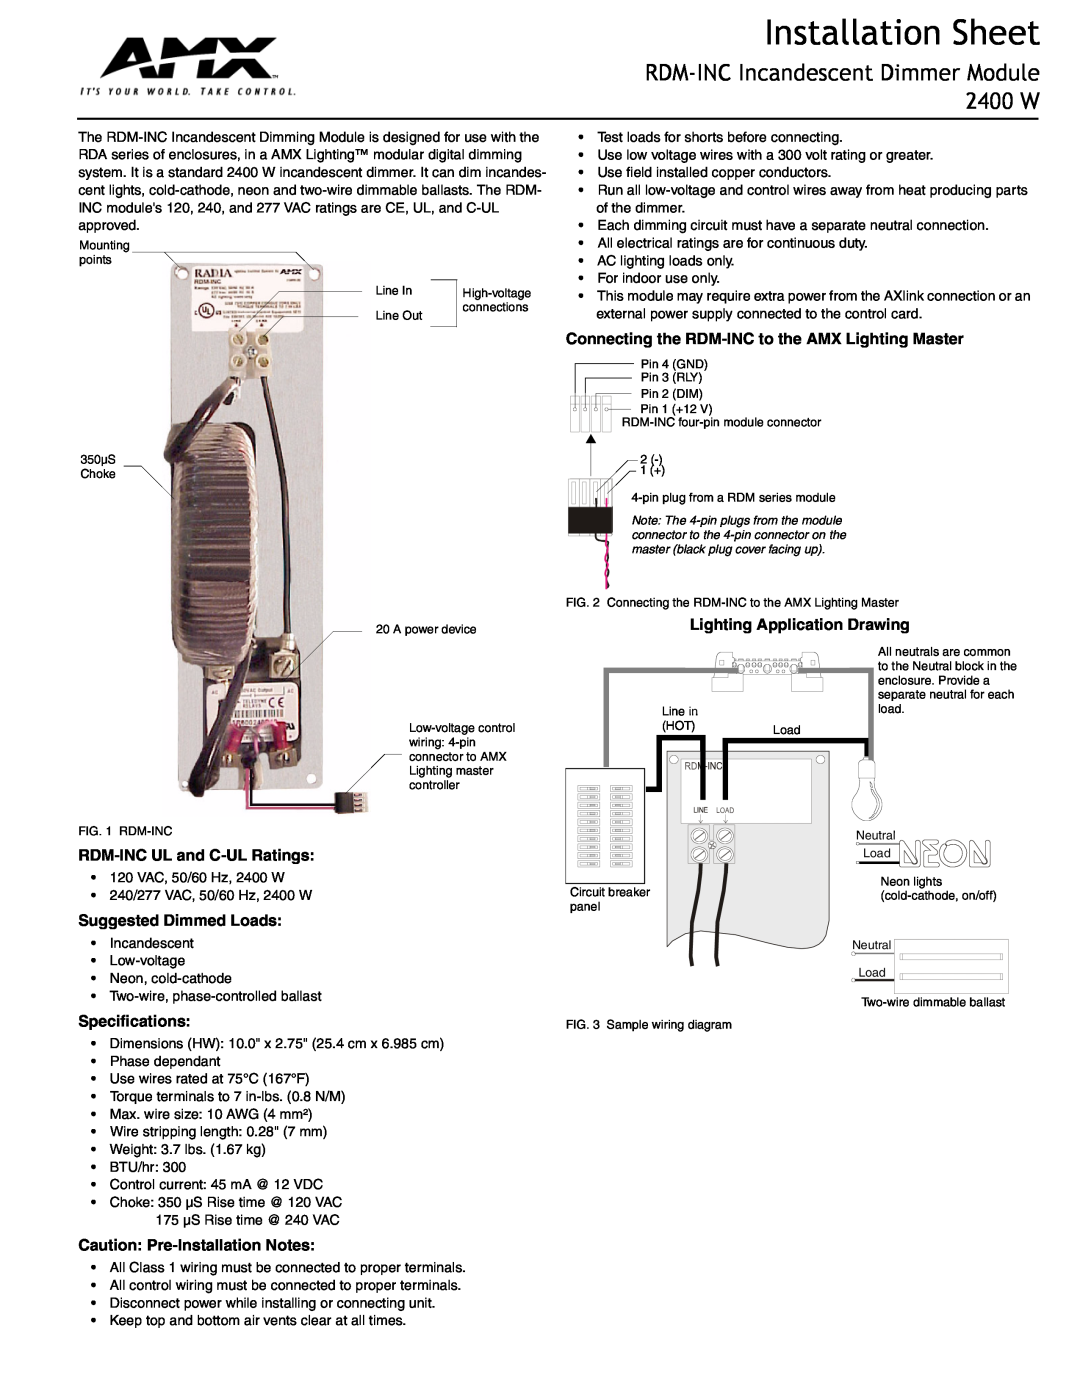 AMX specifications Installation Sheet, RDM-INC Incandescent Dimmer Module 2400 W, RDM-INC UL and C-UL Ratings 